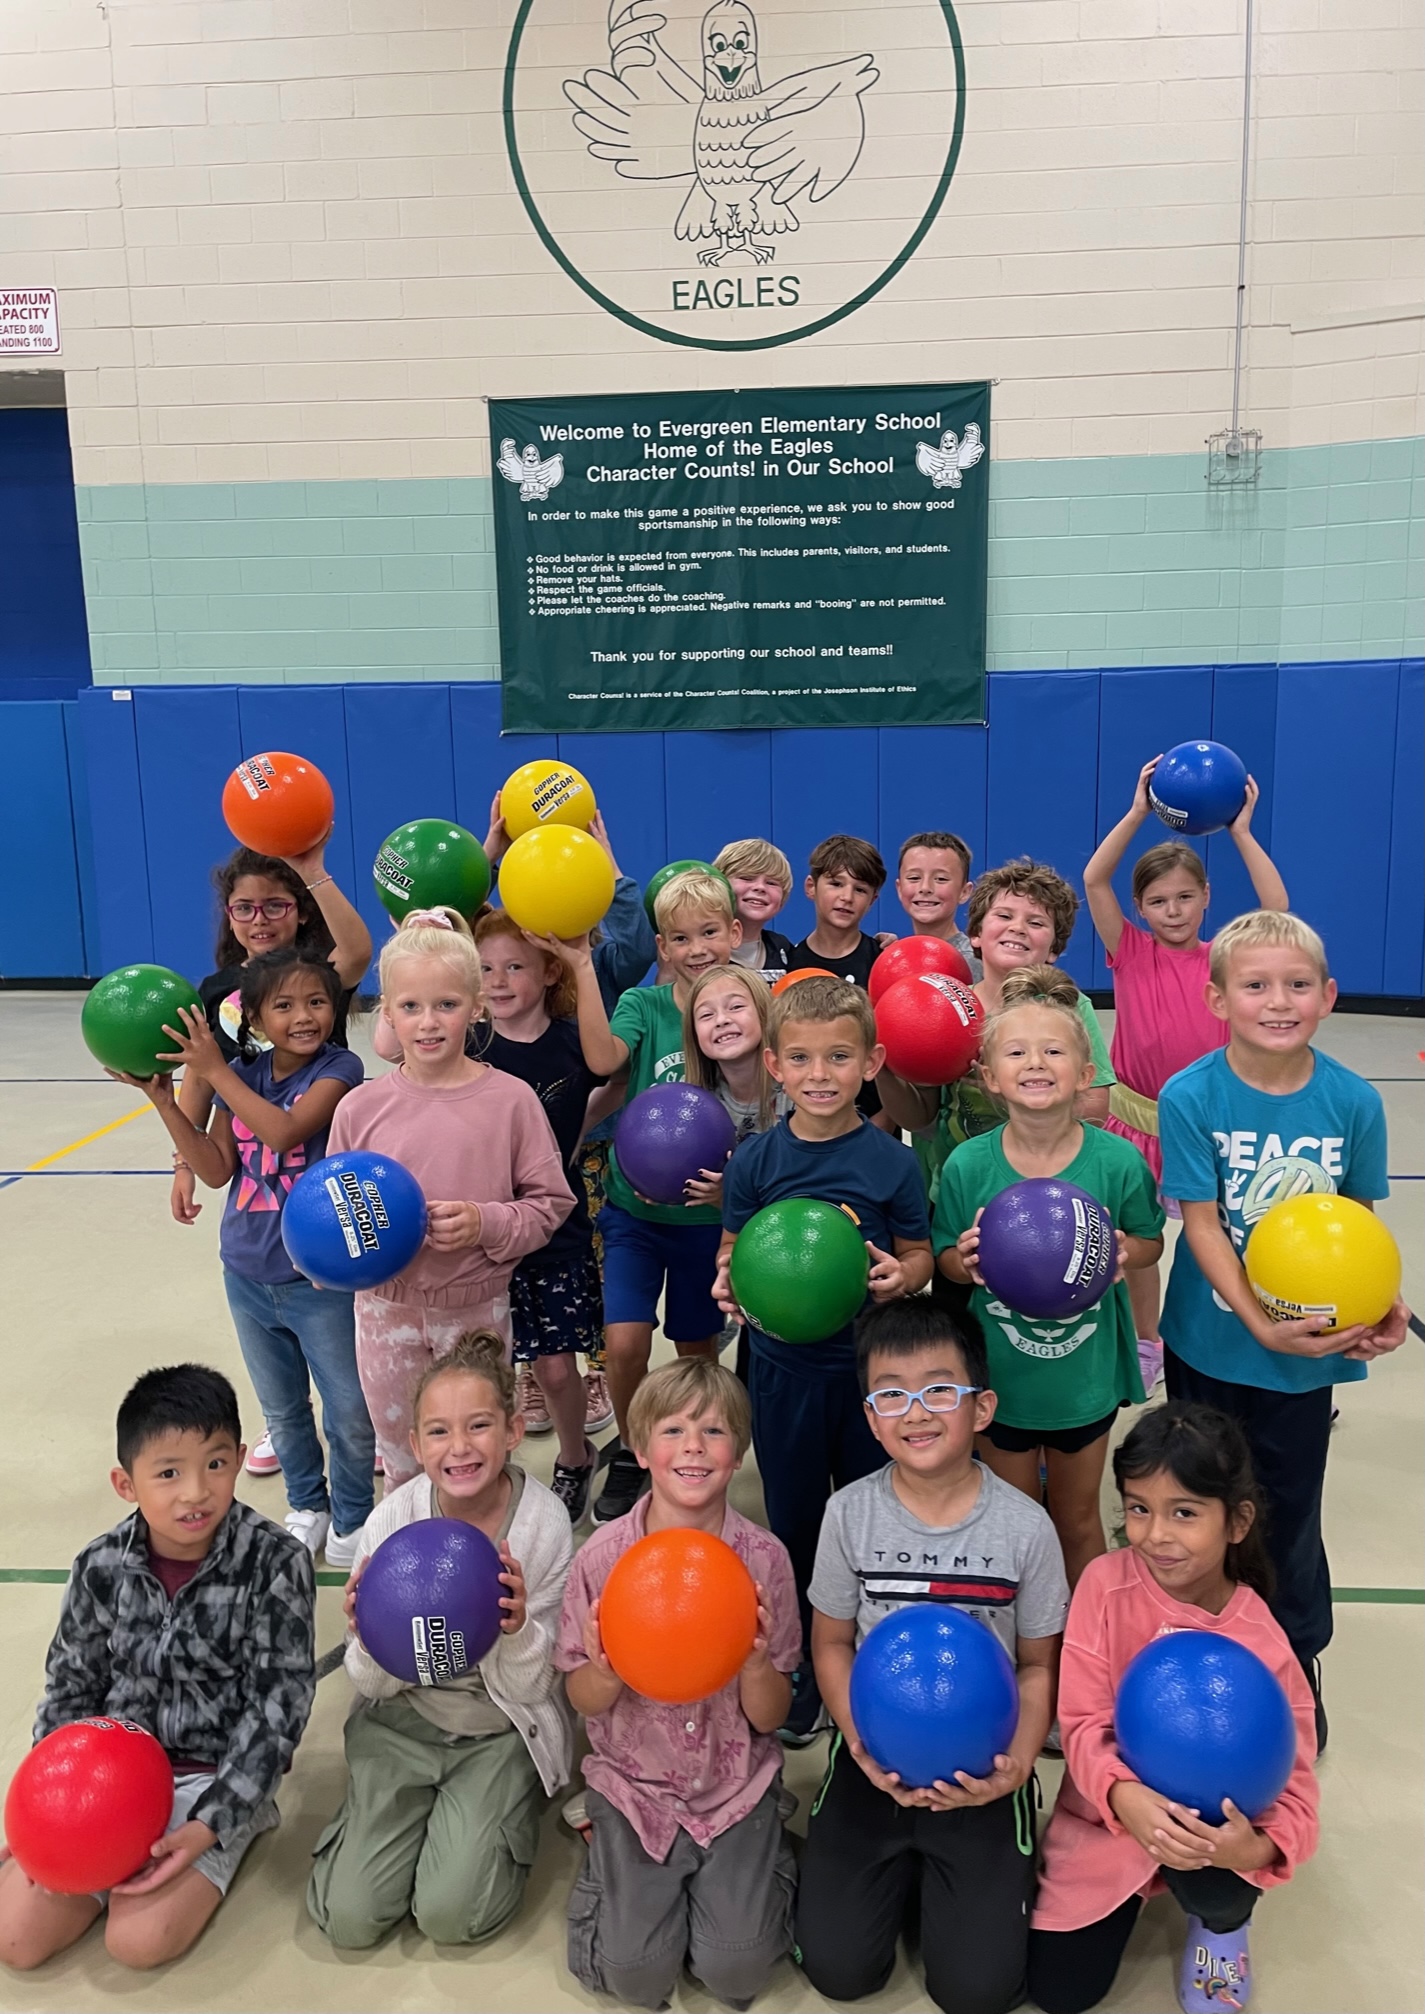 A large group of boys and girls holding colorful dodgeball balls